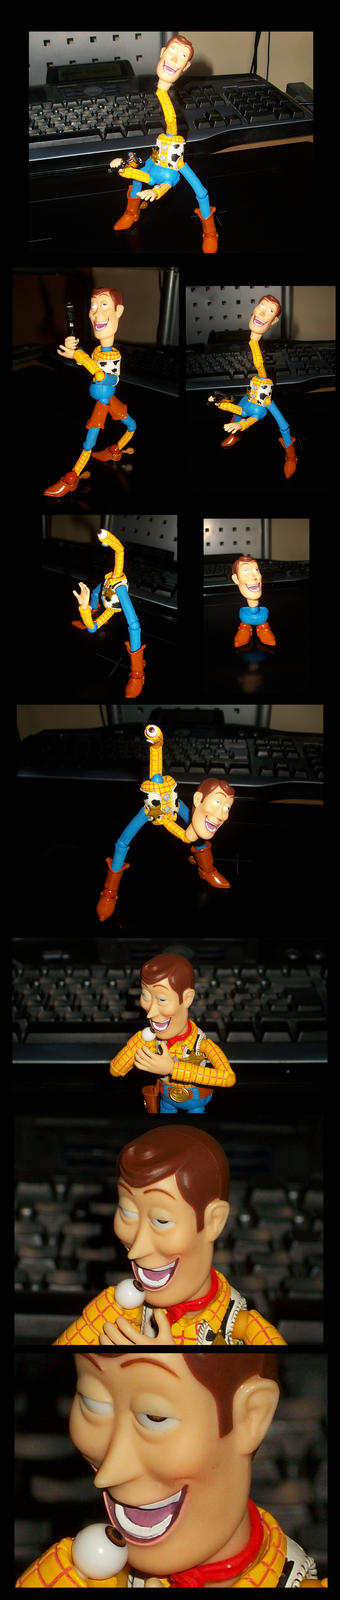 the_many_forms_of_woody_by_zeurel-d36dggq.jpg